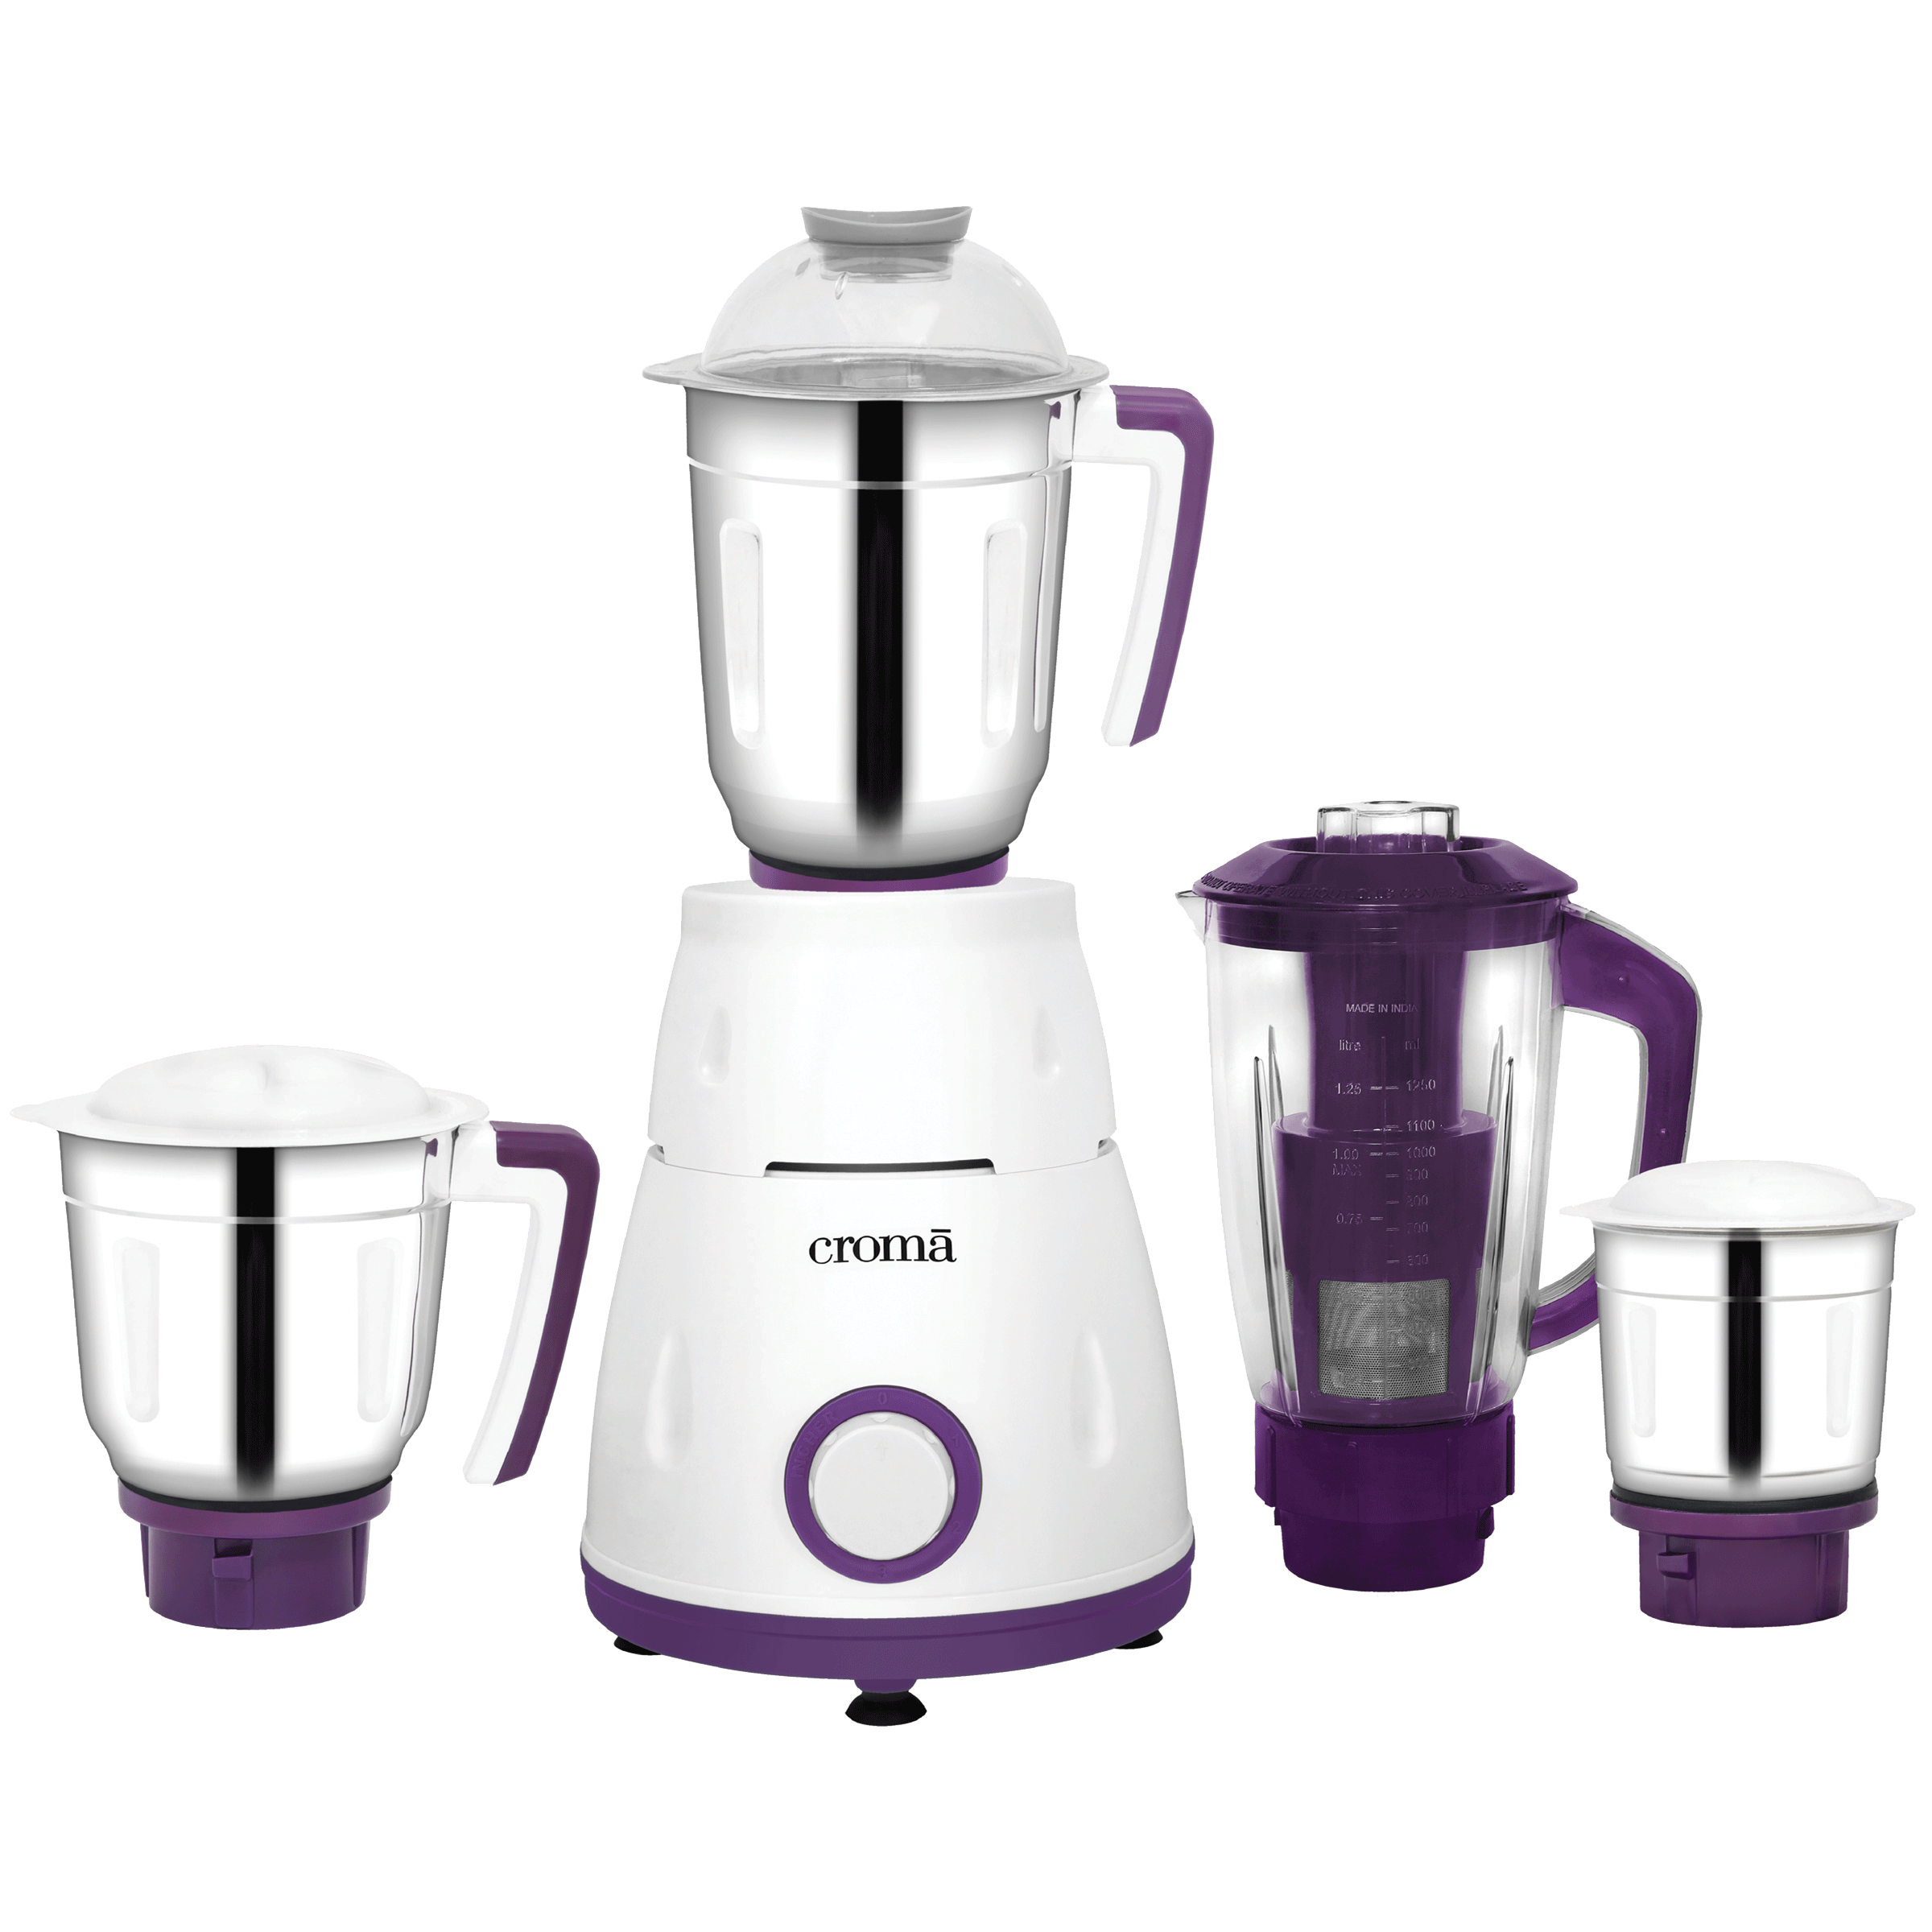 

Croma 750 Watt 4 Jars Mixer Grinder (18000 RPM, 3 Speed Control with Pulse Function, White/Purple)